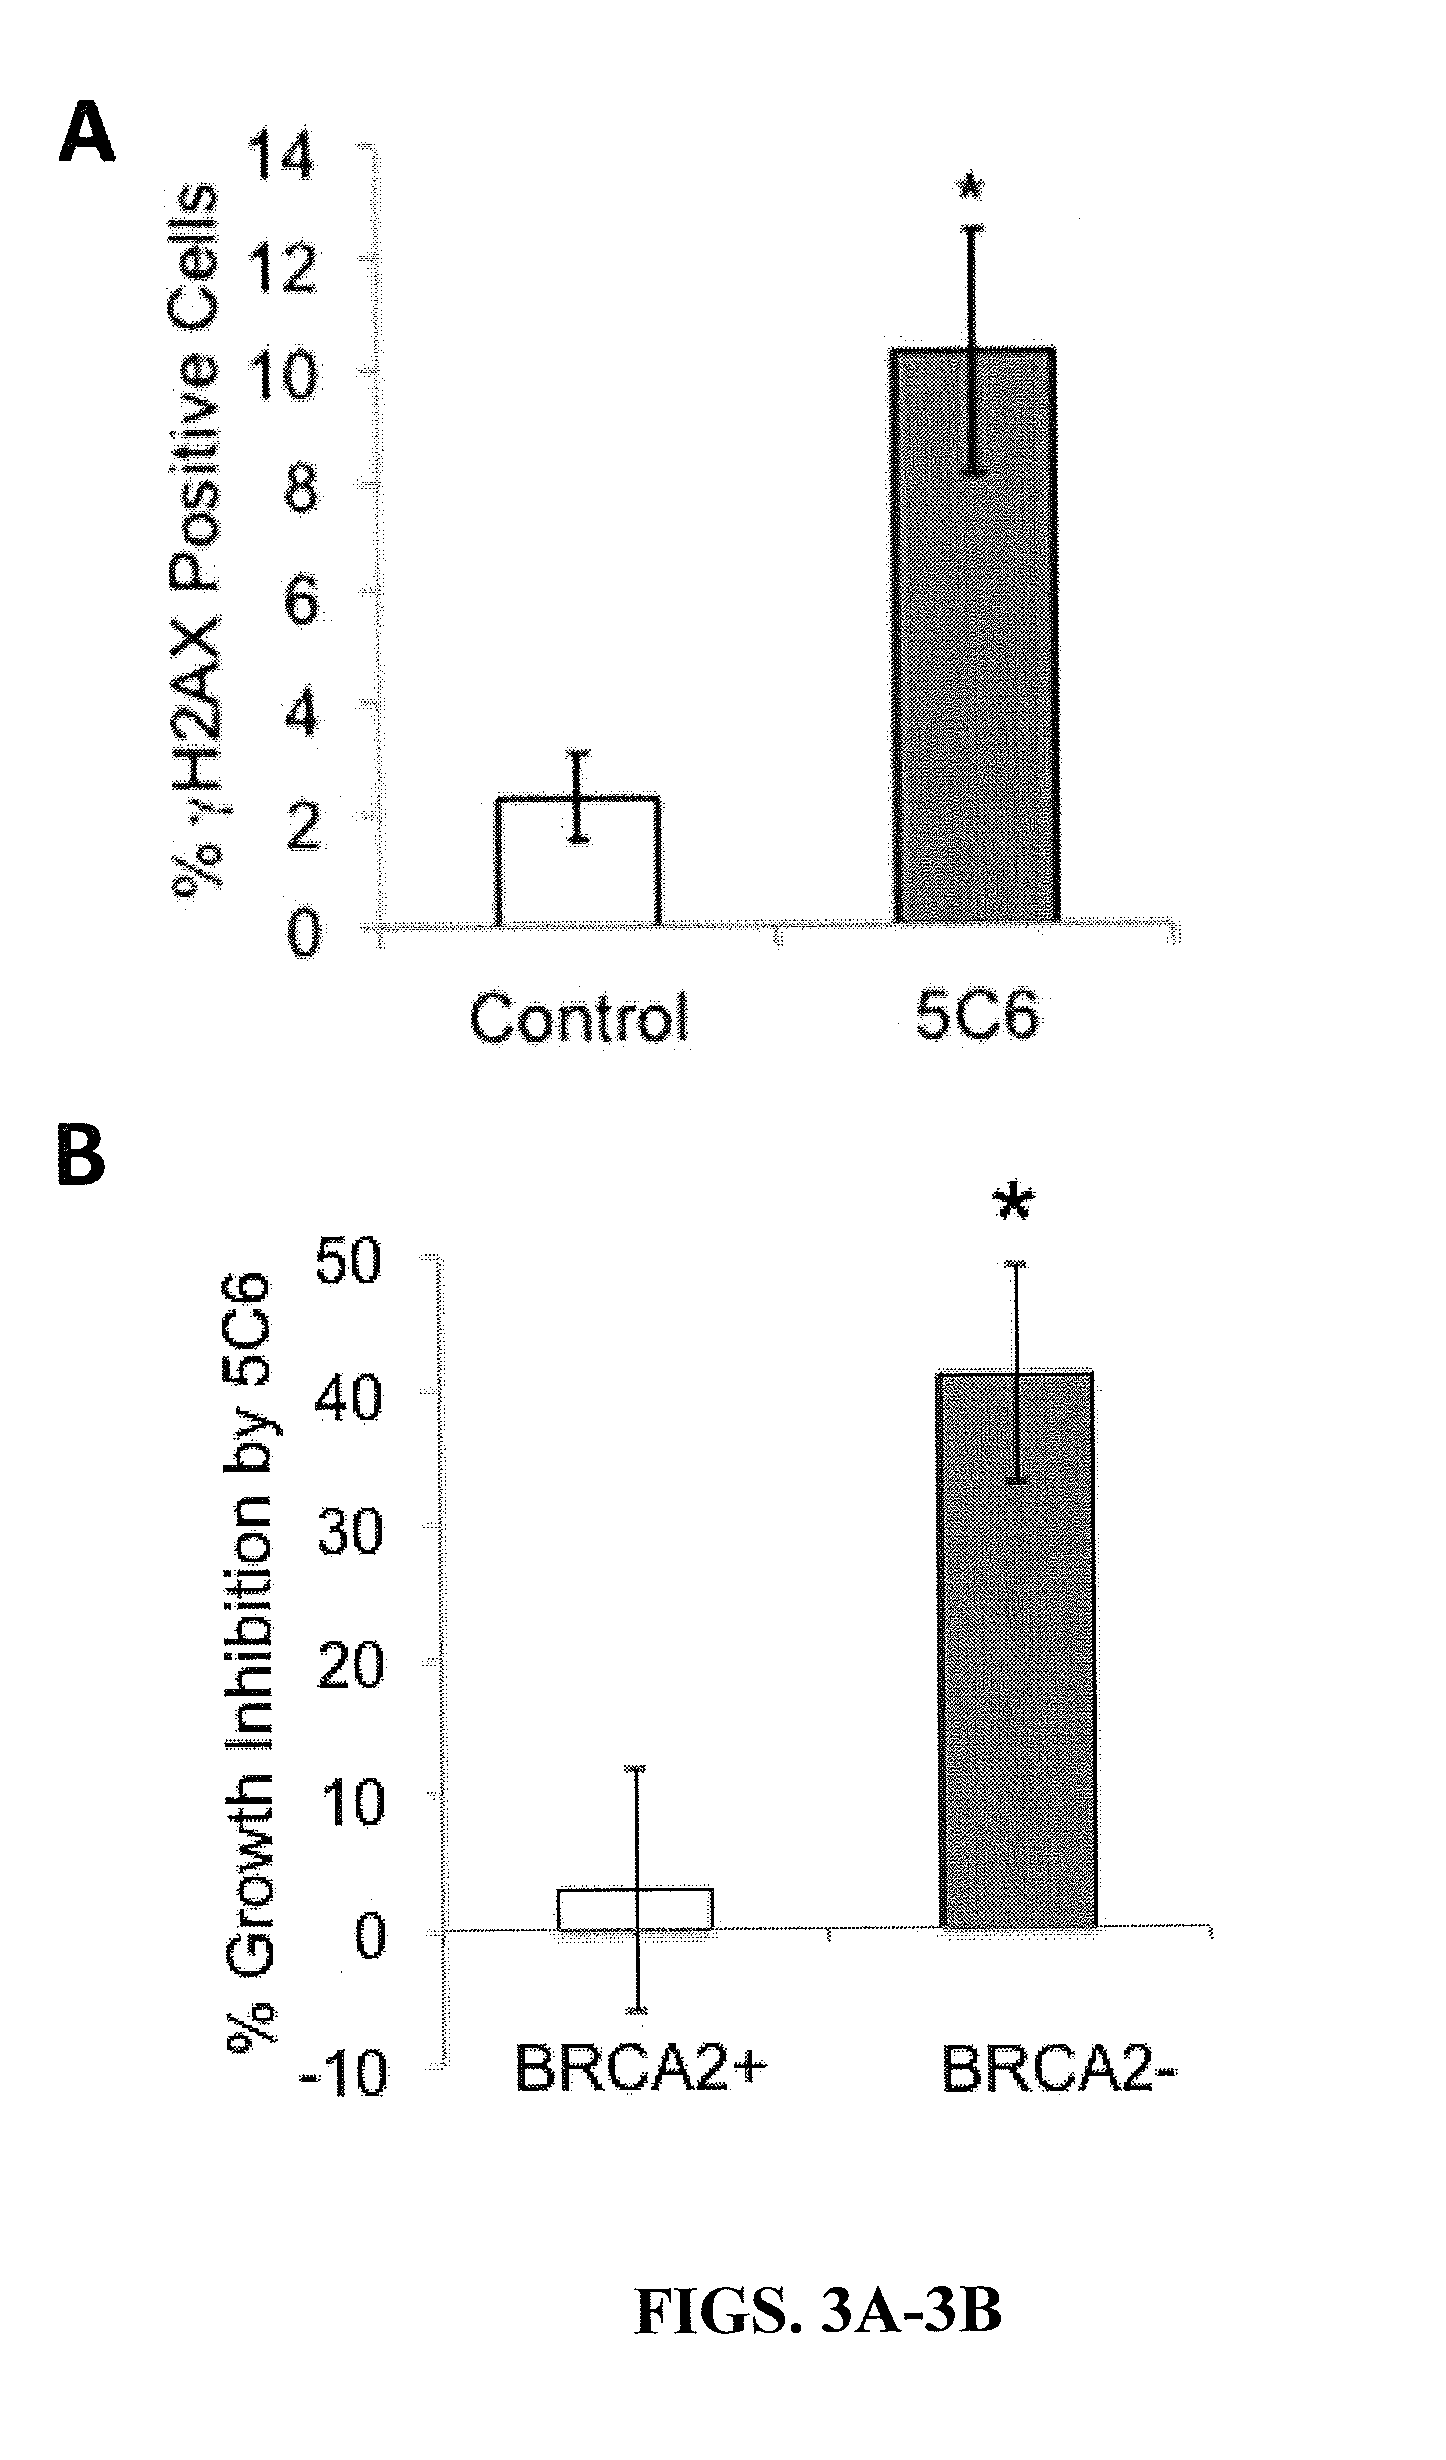 Cell penetrating nucleolytic antibody based cancer therapy